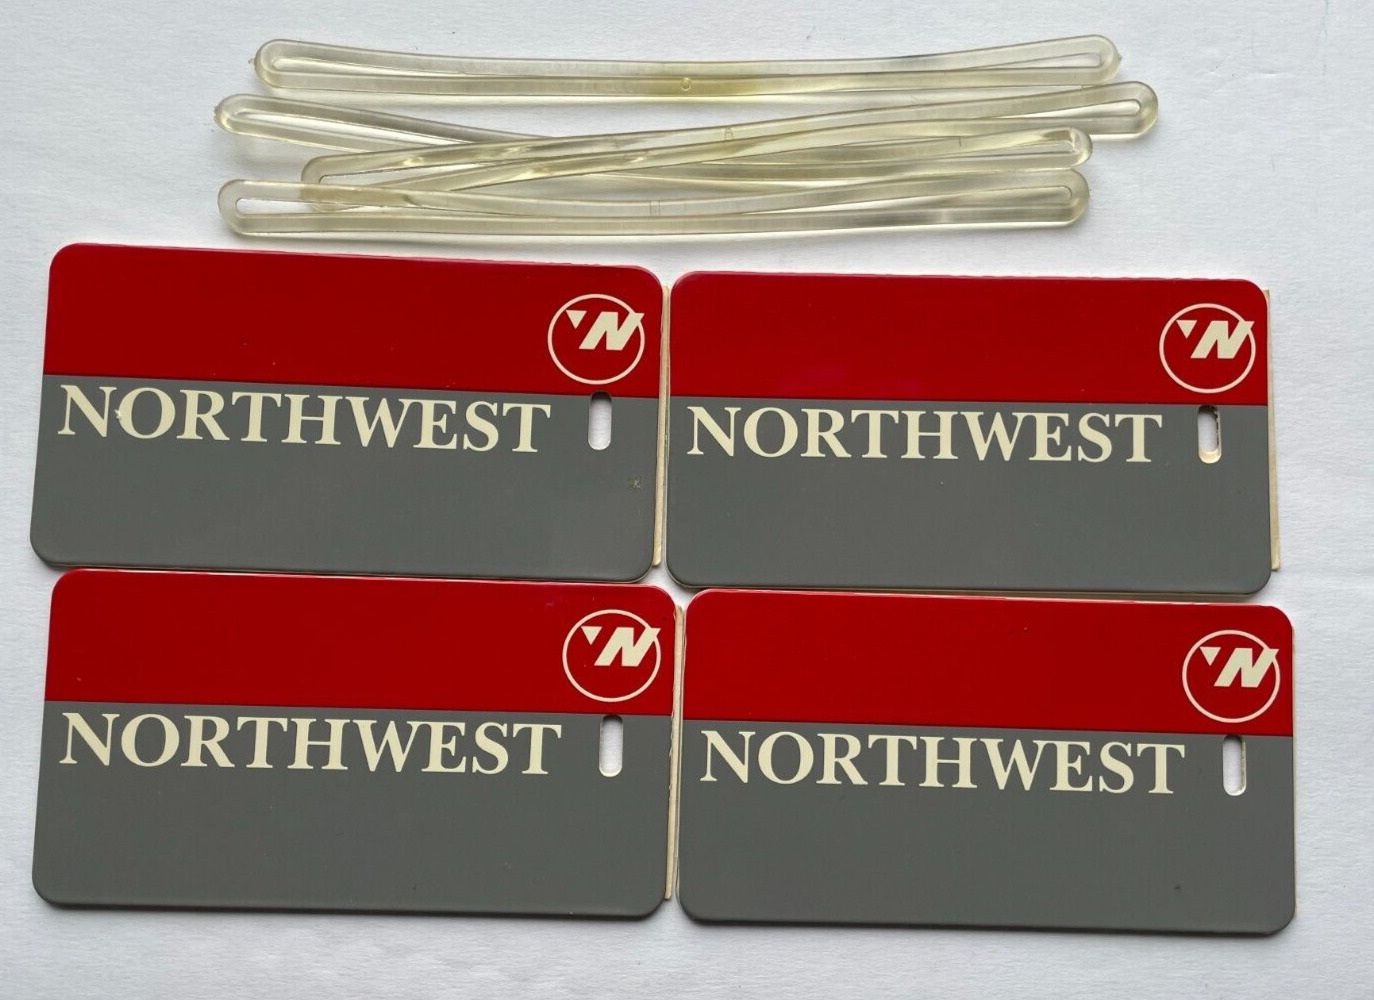 Northwest Airlines Luggage Tags - Four (4) Pack - Vintage Red/Gray Logo